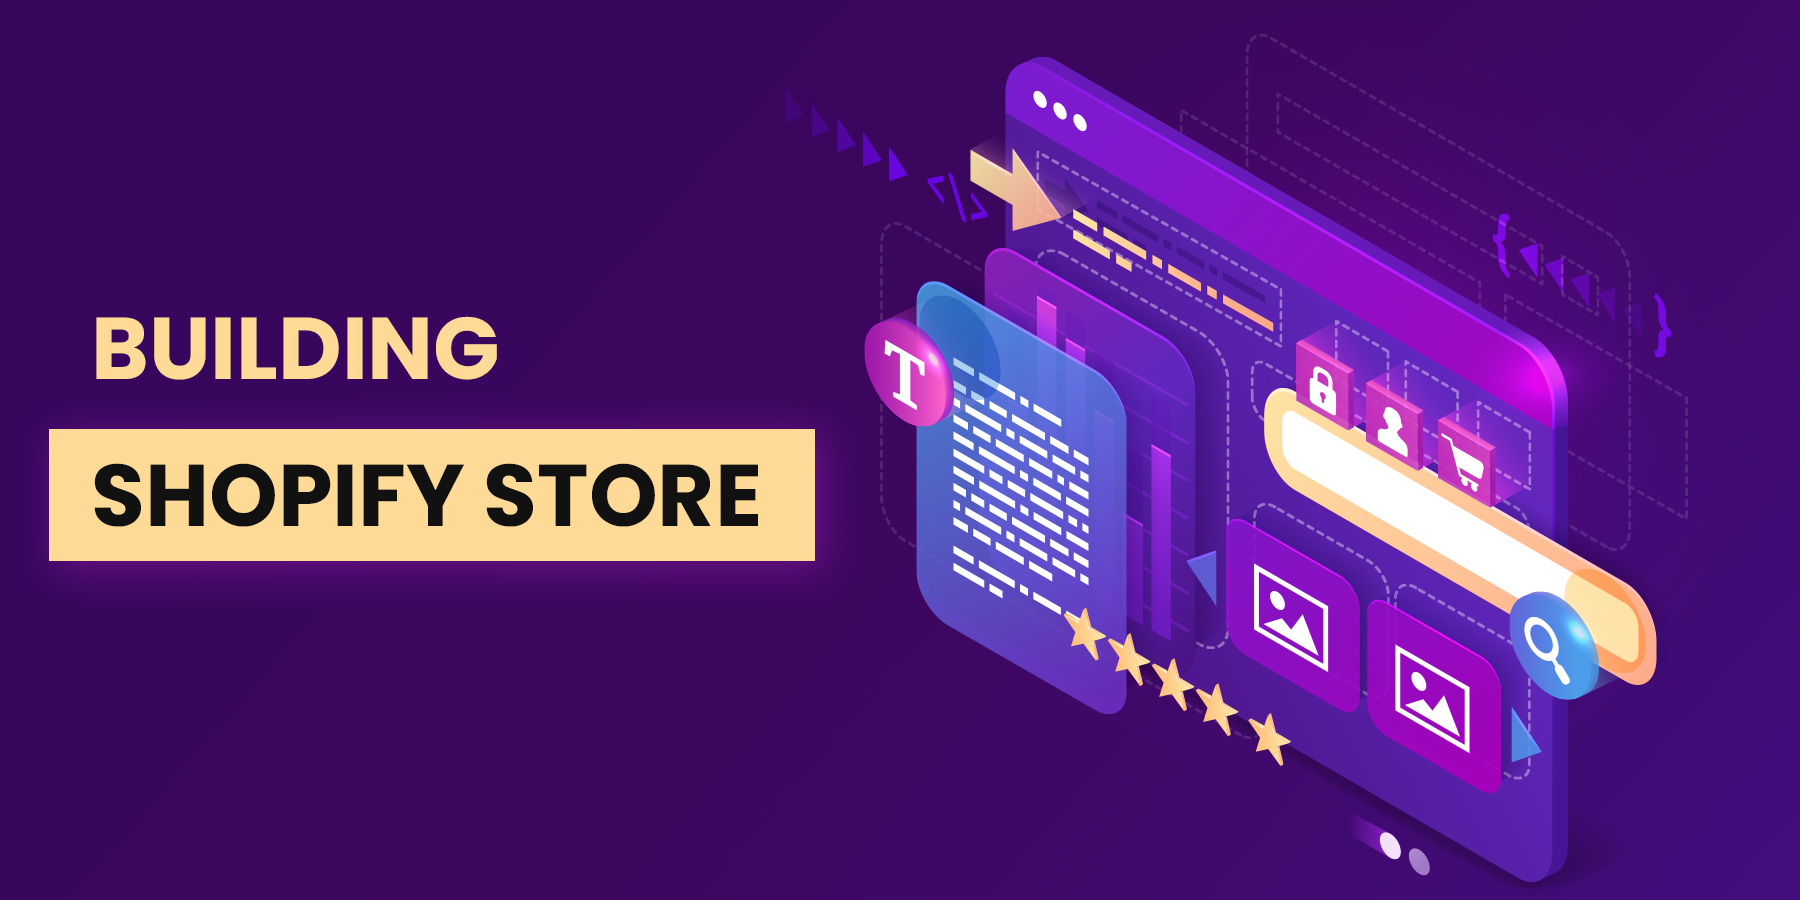 How to Build a Shopify Store from Scratch